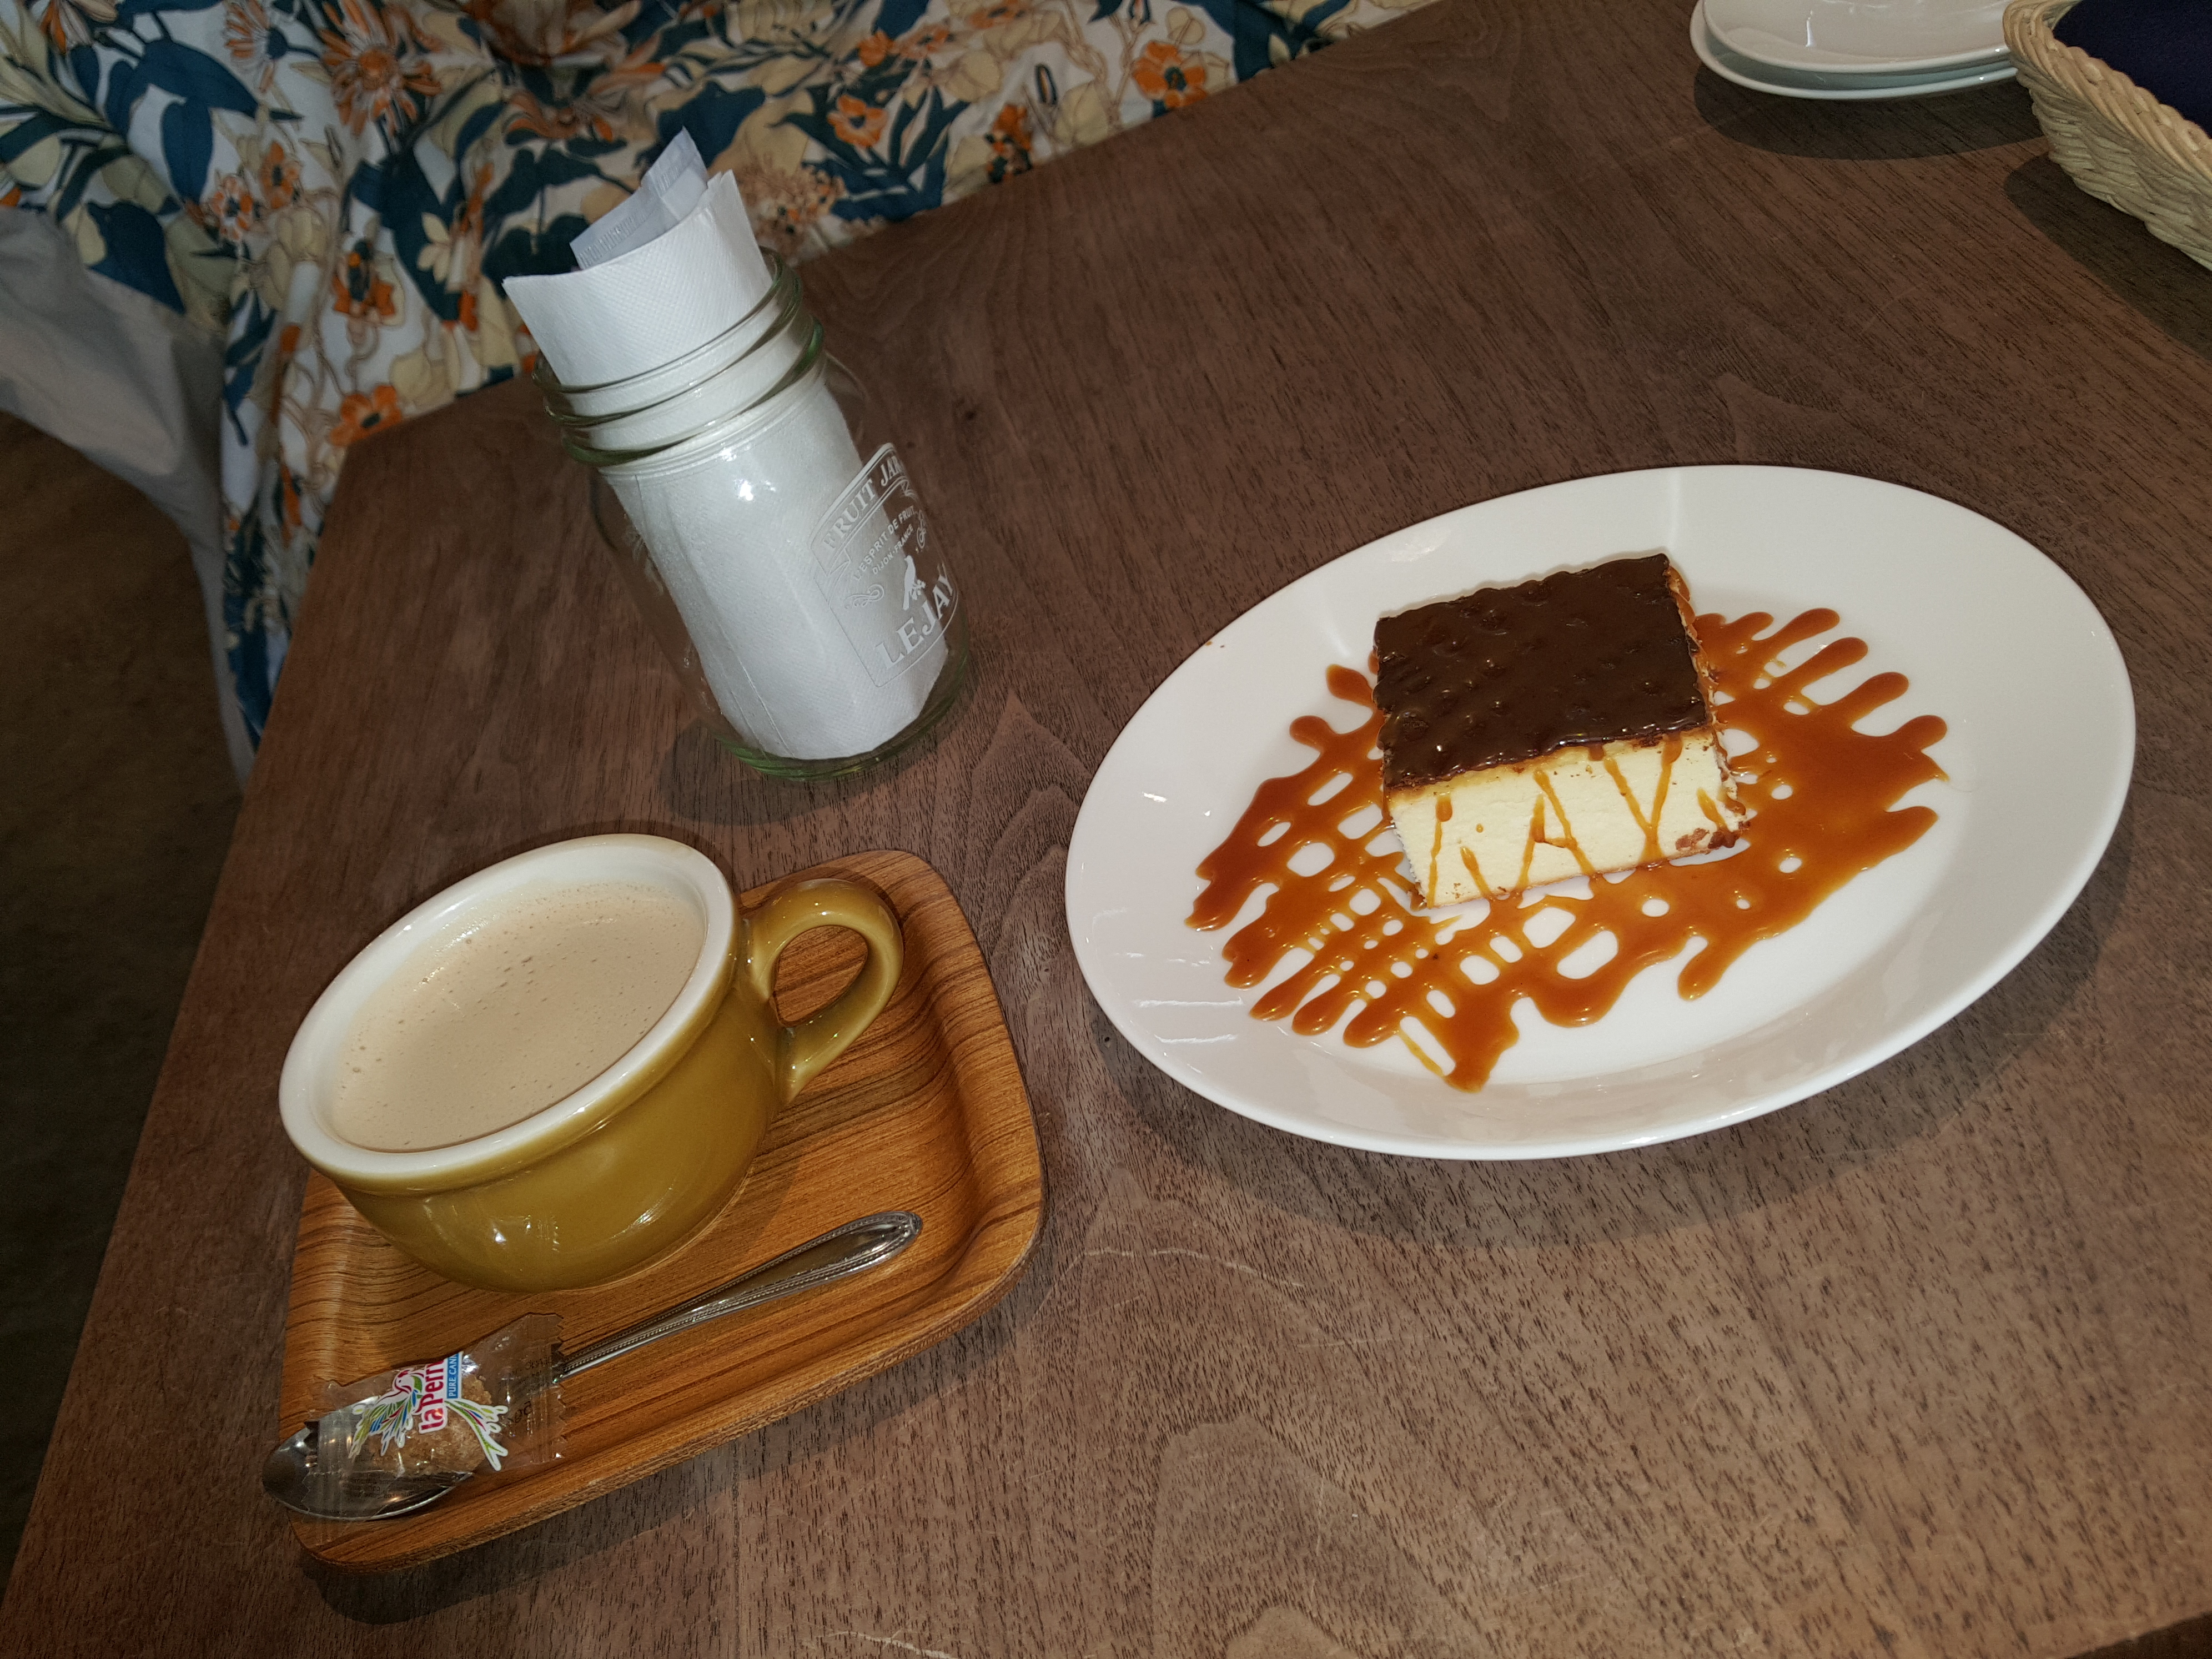 new york style of chees cake and cafe au late20180927_161609